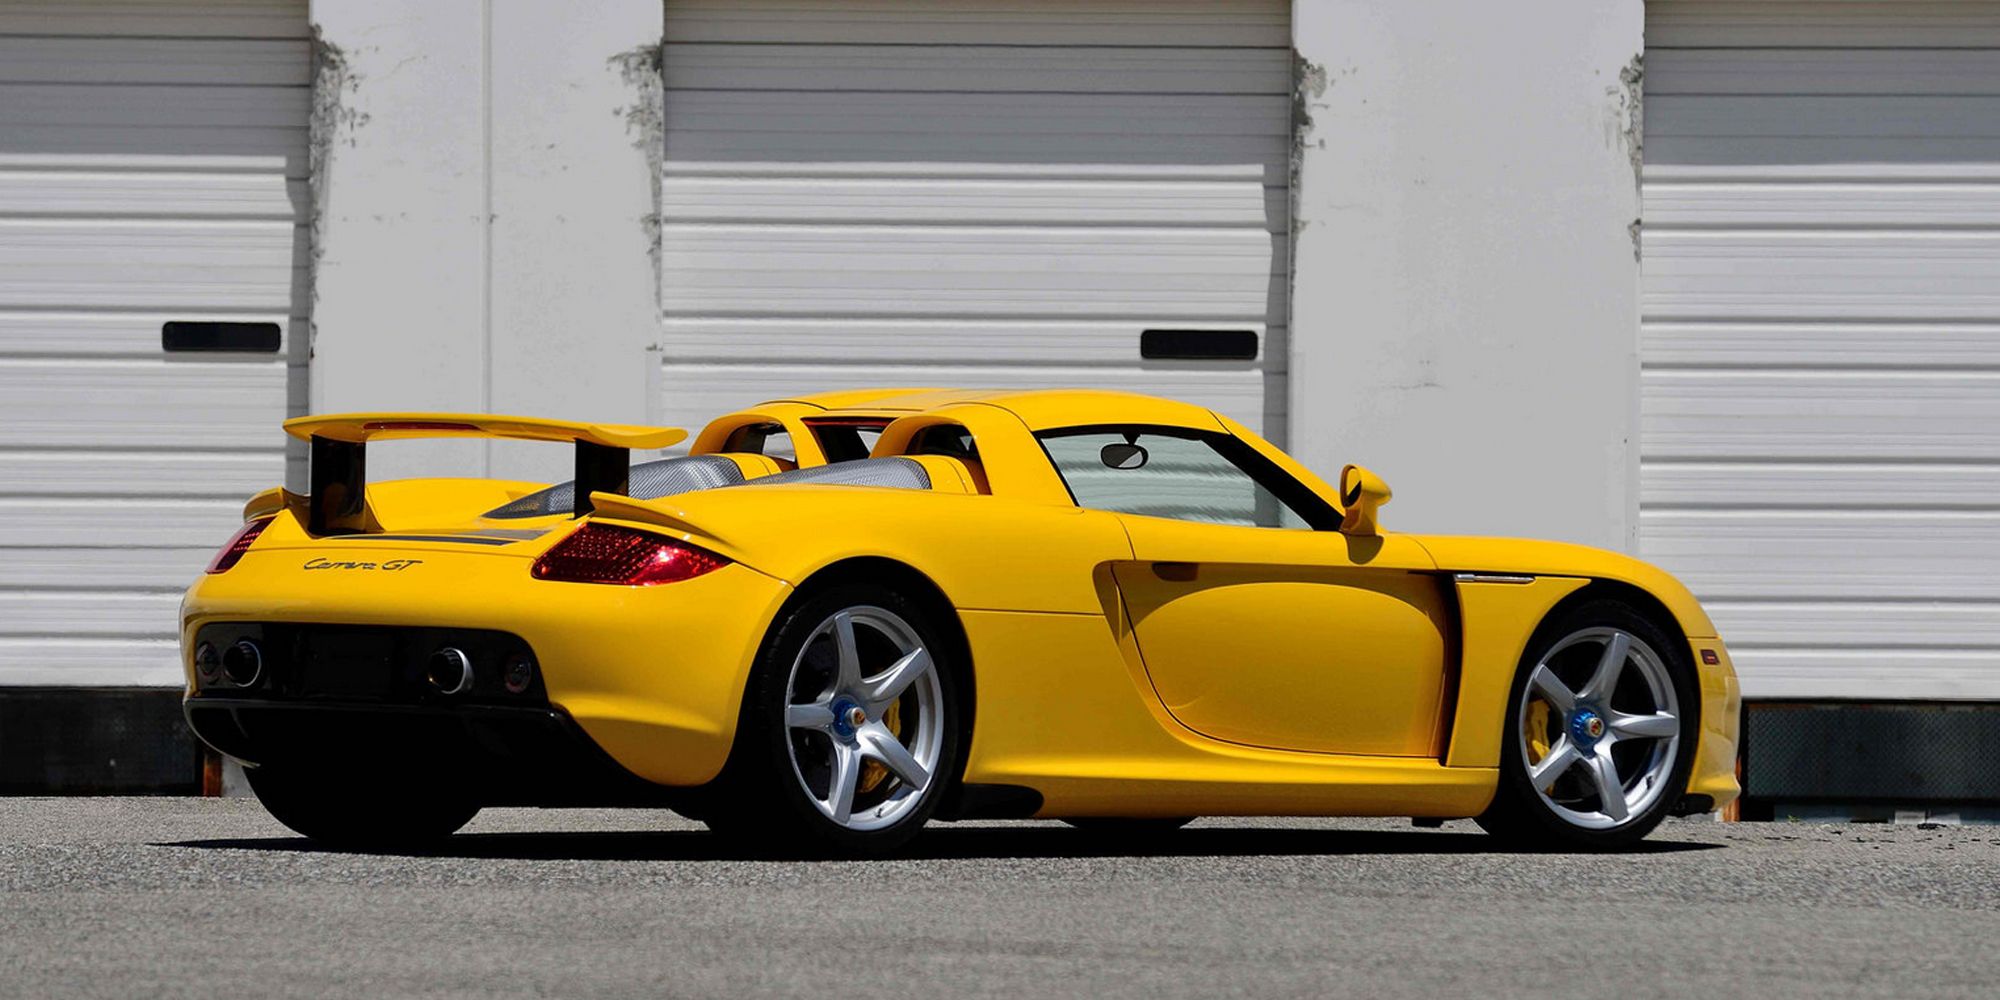 Rear 3/4 view of a yellow Carrera GT